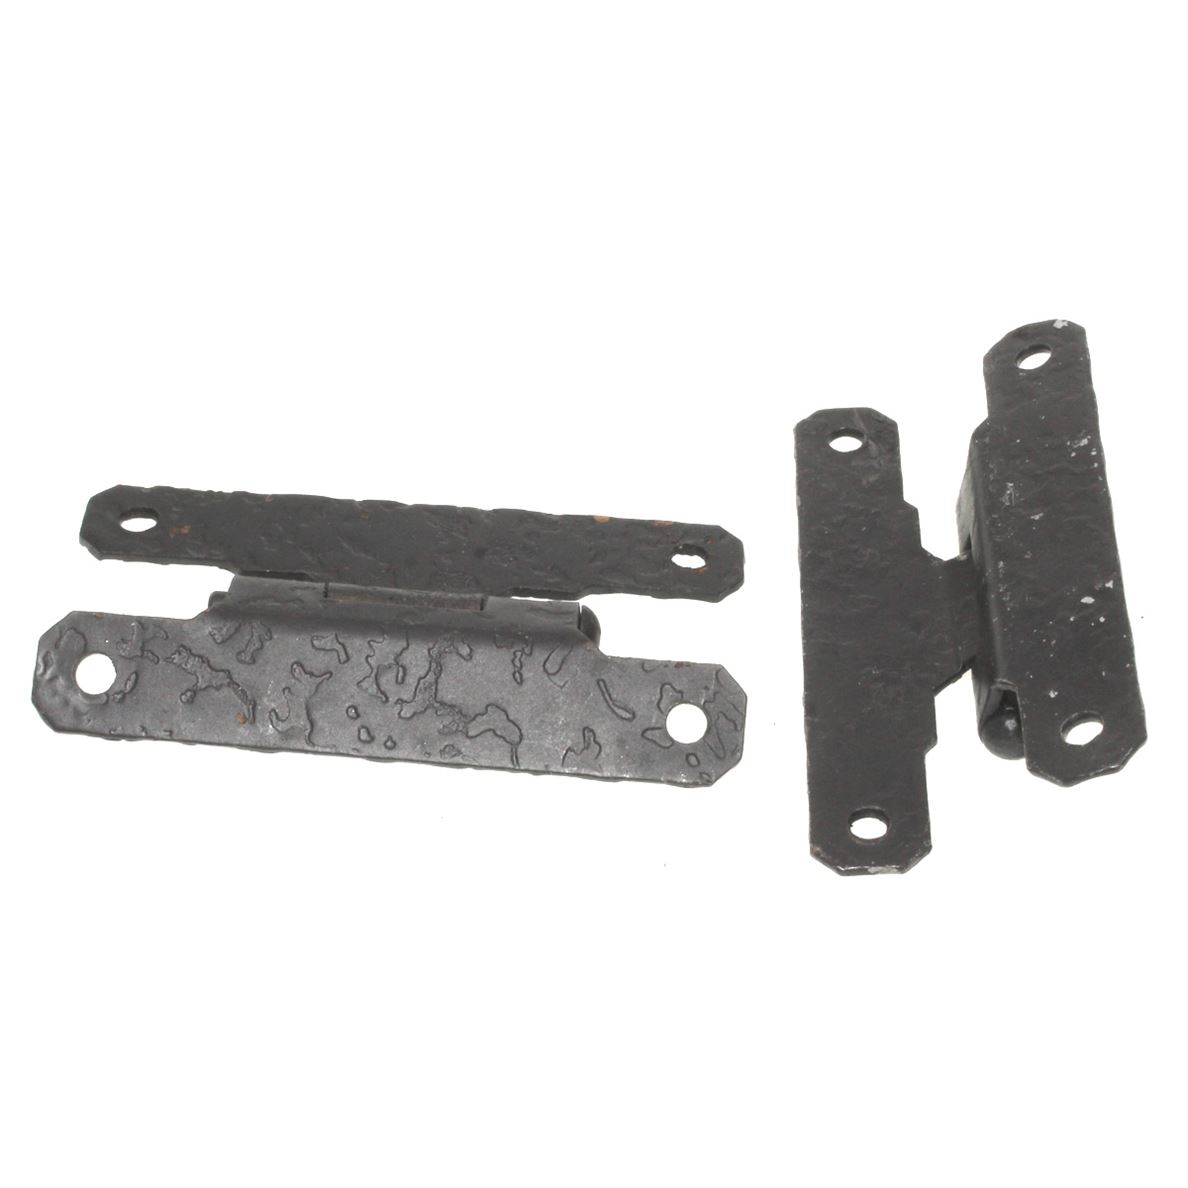 Pair McKinney Forged Iron Hammered 3/8" Offset "H" Hinges Dead Black 12724-DB